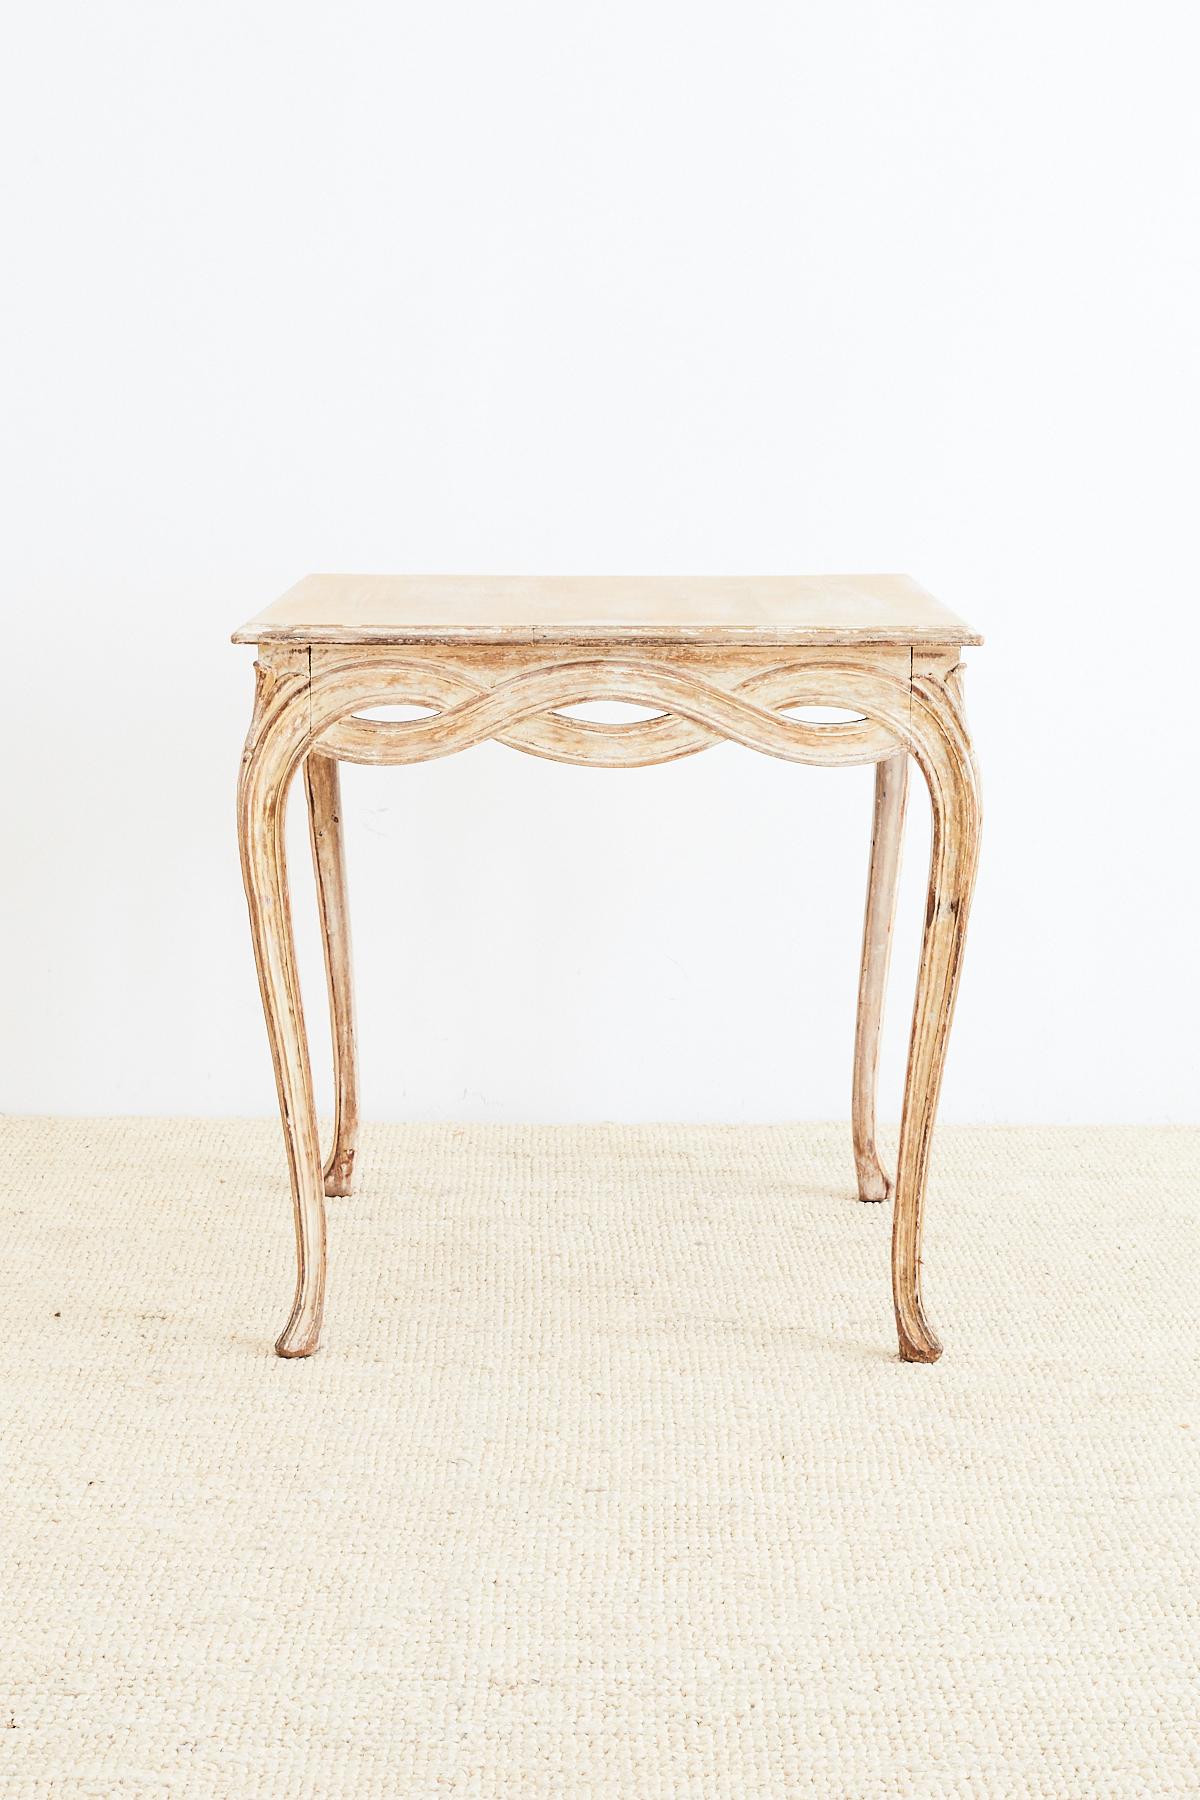 Elegant Italian occasional table or centre table featuring a beautifully carved apron and legs. The tapered cabriole legs intertwine on the apron with a decorative looped design. The table has a distressed or scraped paint finish with lovely old